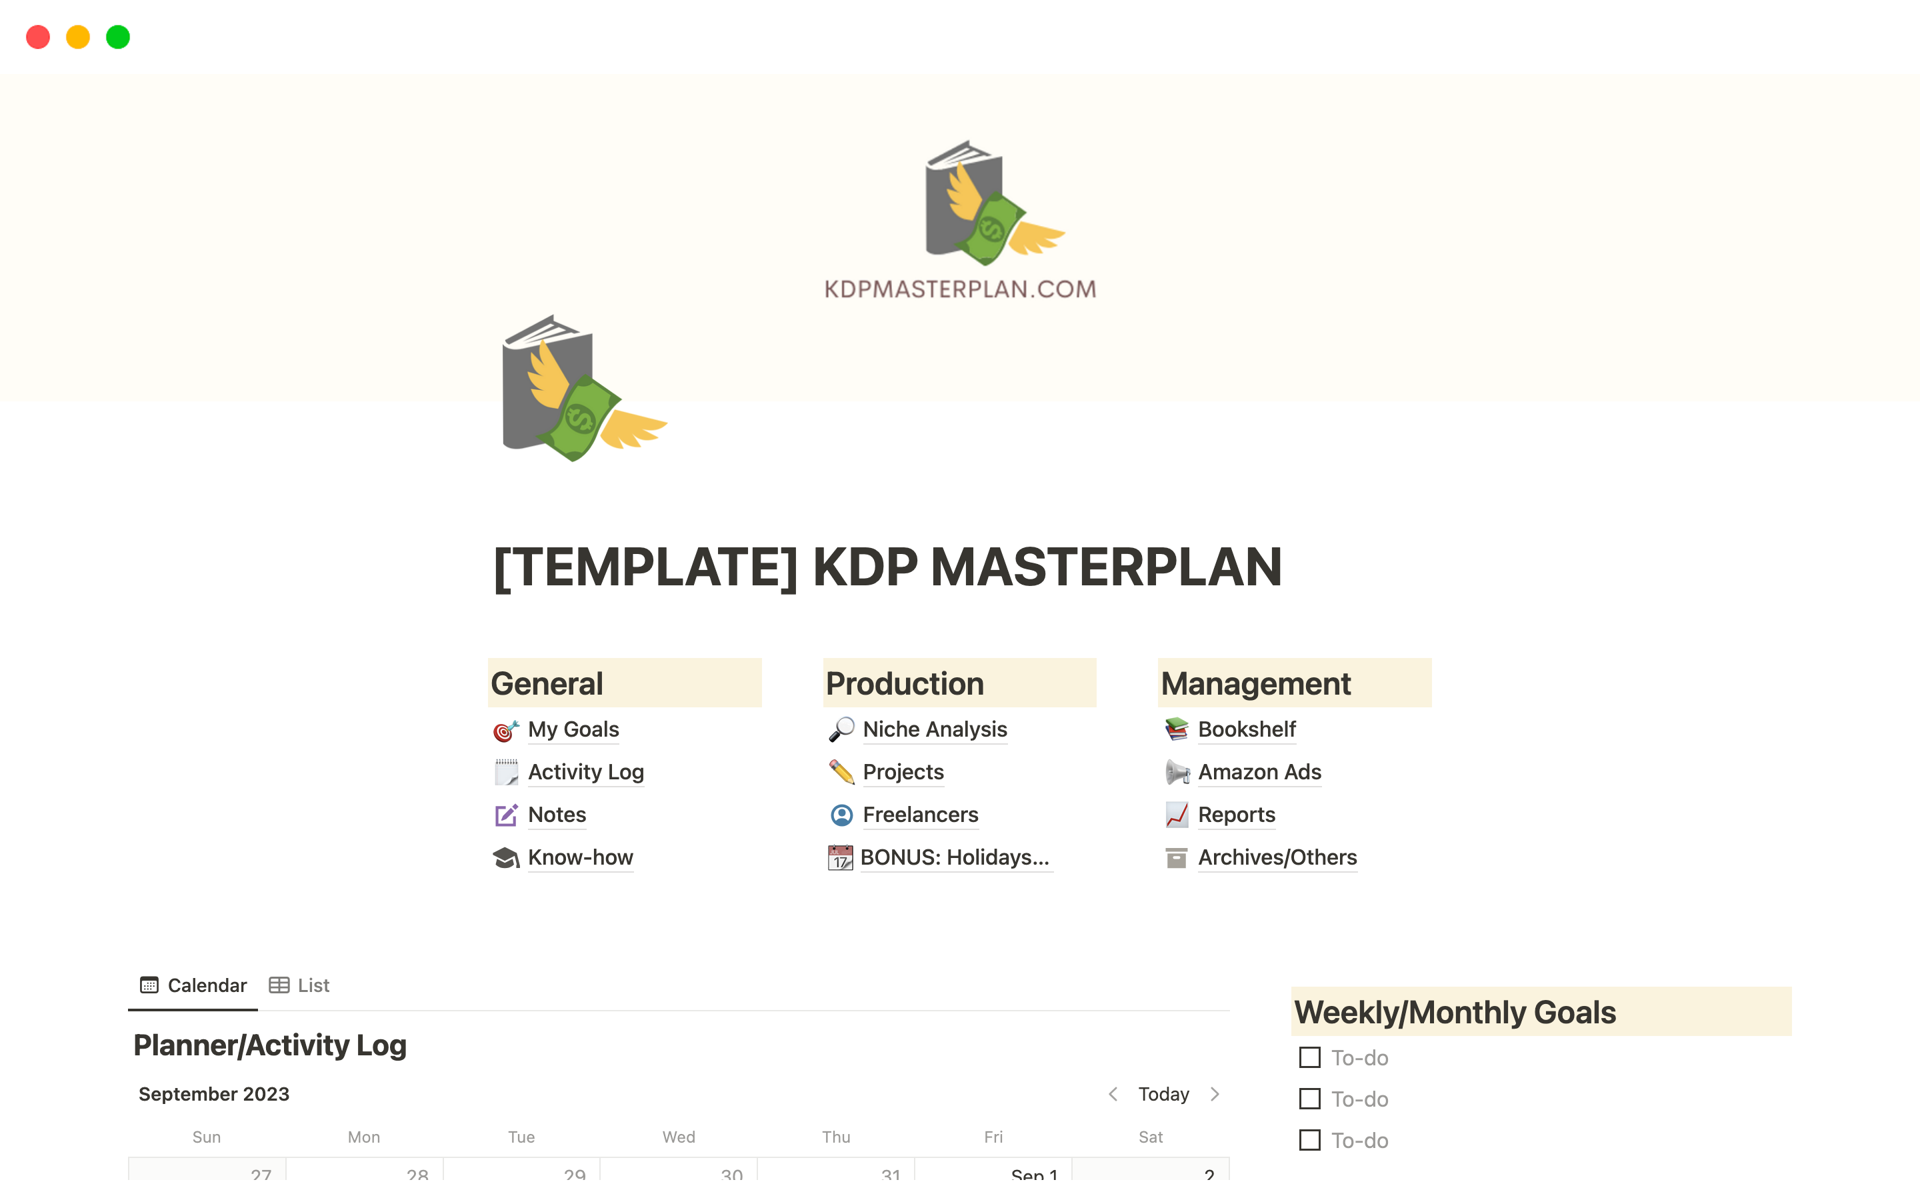 KDP Masterplan is a comprehensive workspace to manage your self-publishing business. KDP Masterplan will help you organize all stages of your KDP work such as niche searches, production, goal achievement, Amazon Ads management, and more. It’s an all-in-one space.